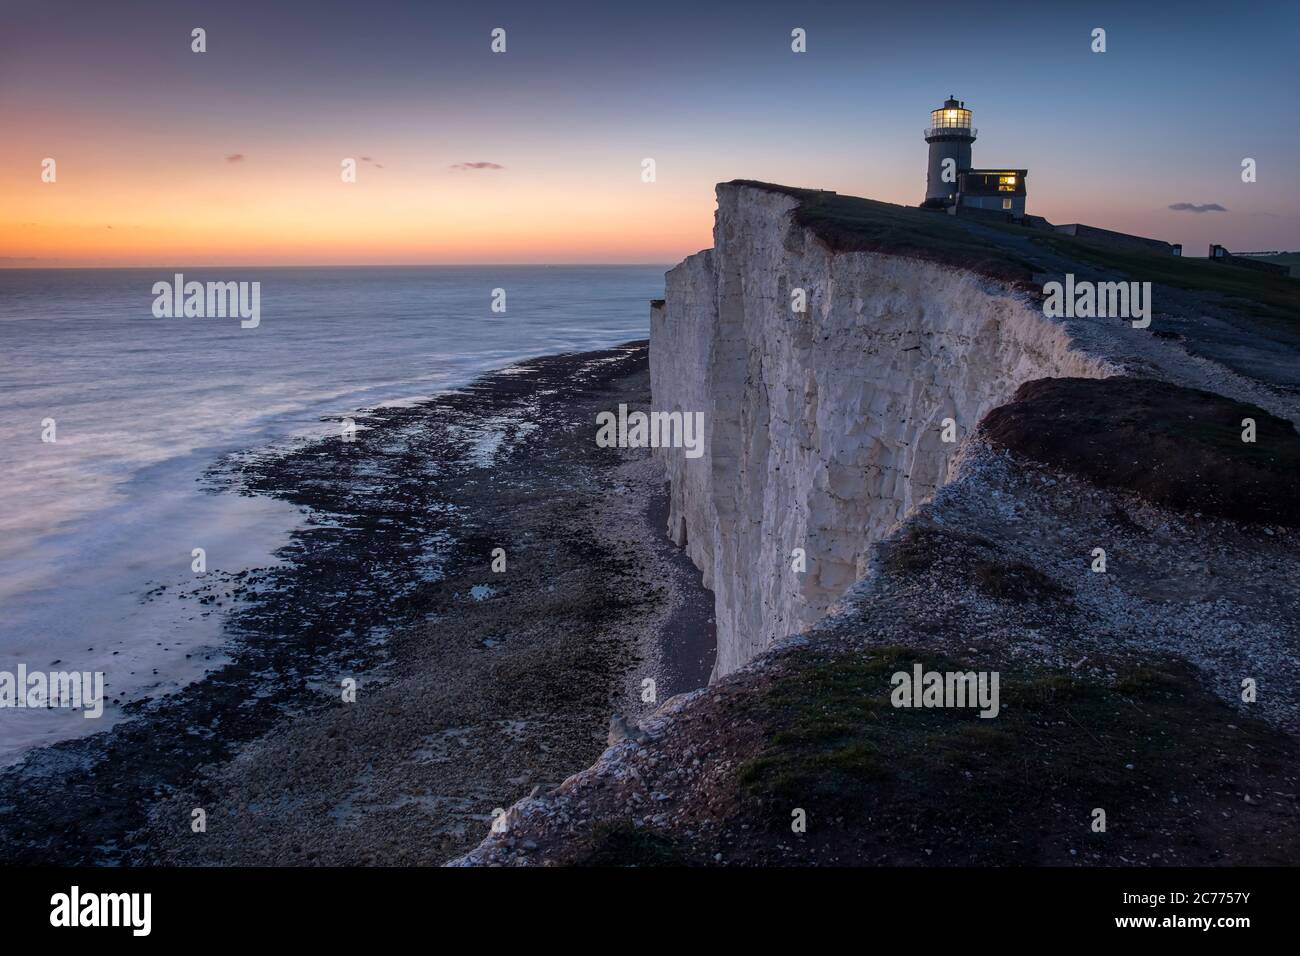 Faro Belle Tout al crepuscolo, Beachy Head, vicino a Eastbourne, South Downs National Park, East Sussex, Inghilterra, Regno Unito Foto Stock